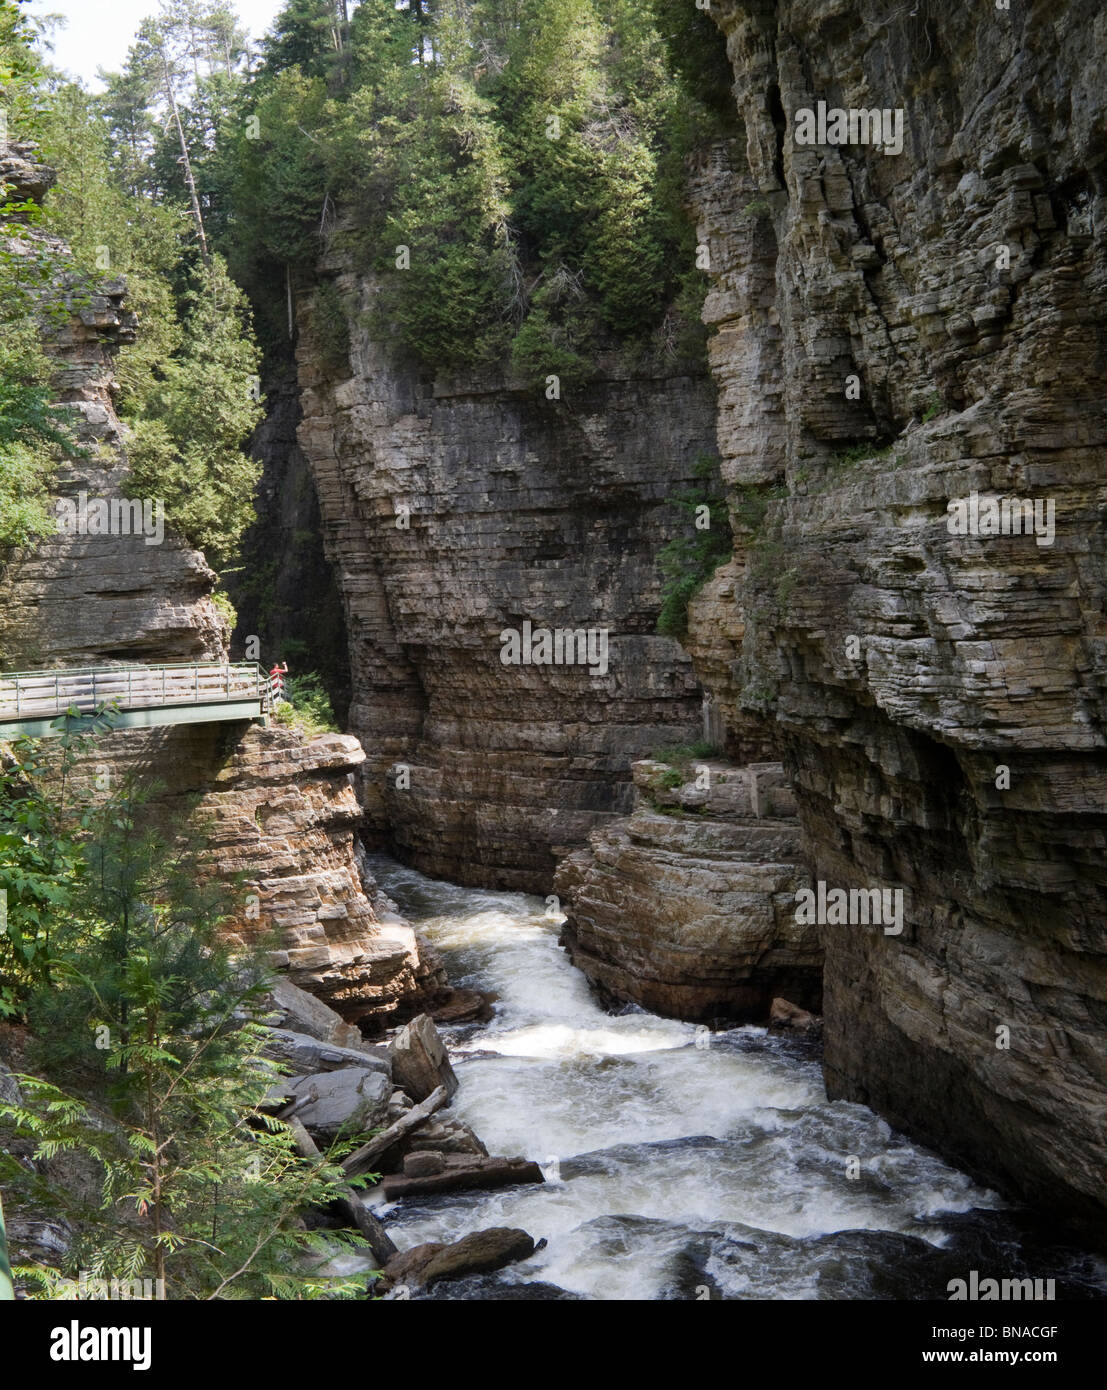 Rock formations and the Ausable River at Ausable Chasm. Shot from the rim of the chasm. Stock Photo